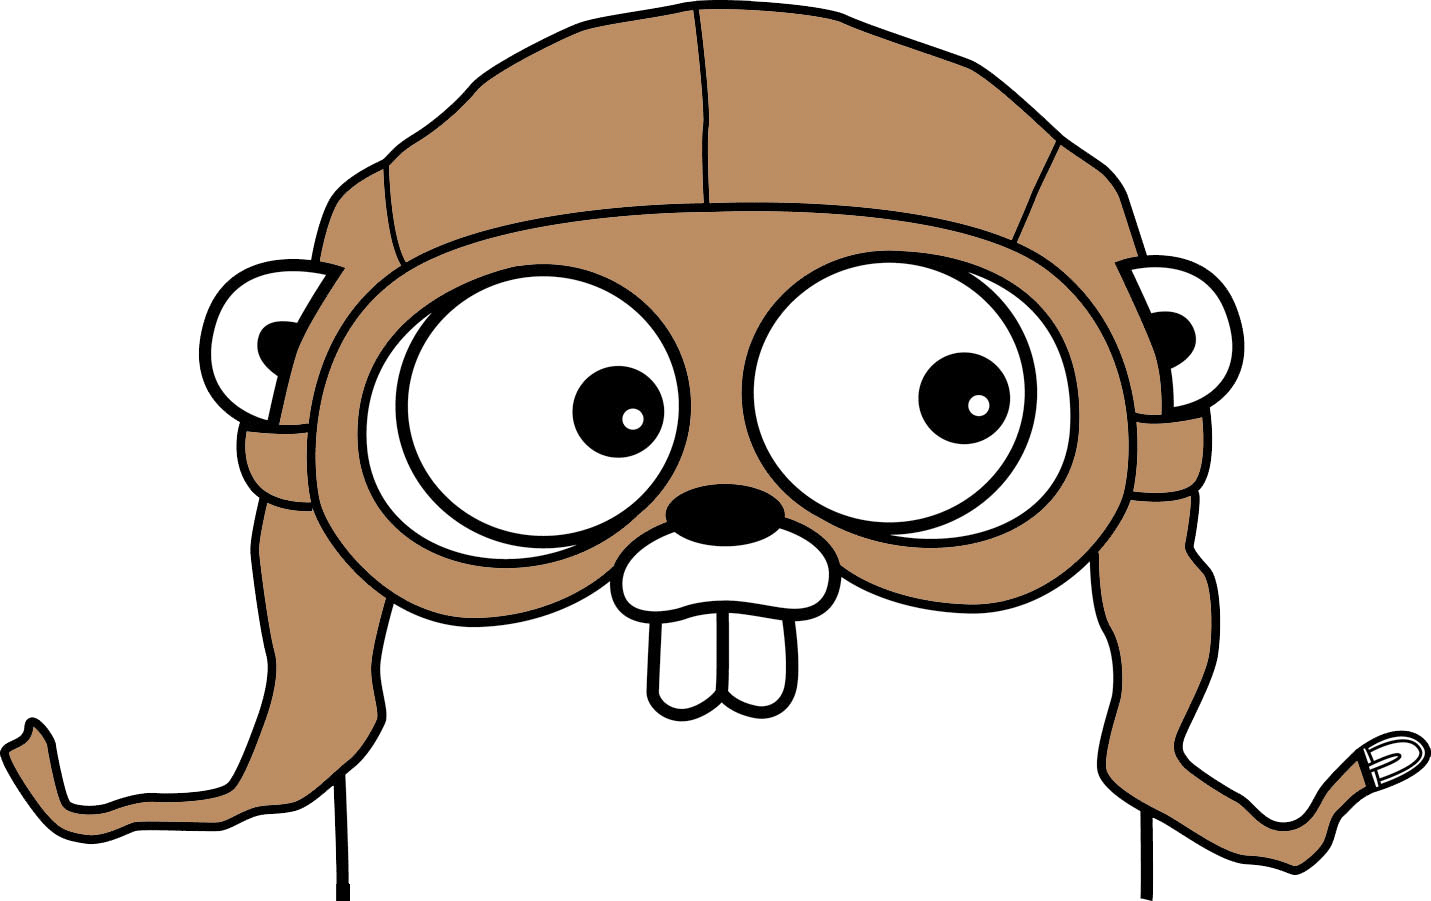 Golang News, Libraries, Apps & More - Golang Gopher Logo (1431x901)